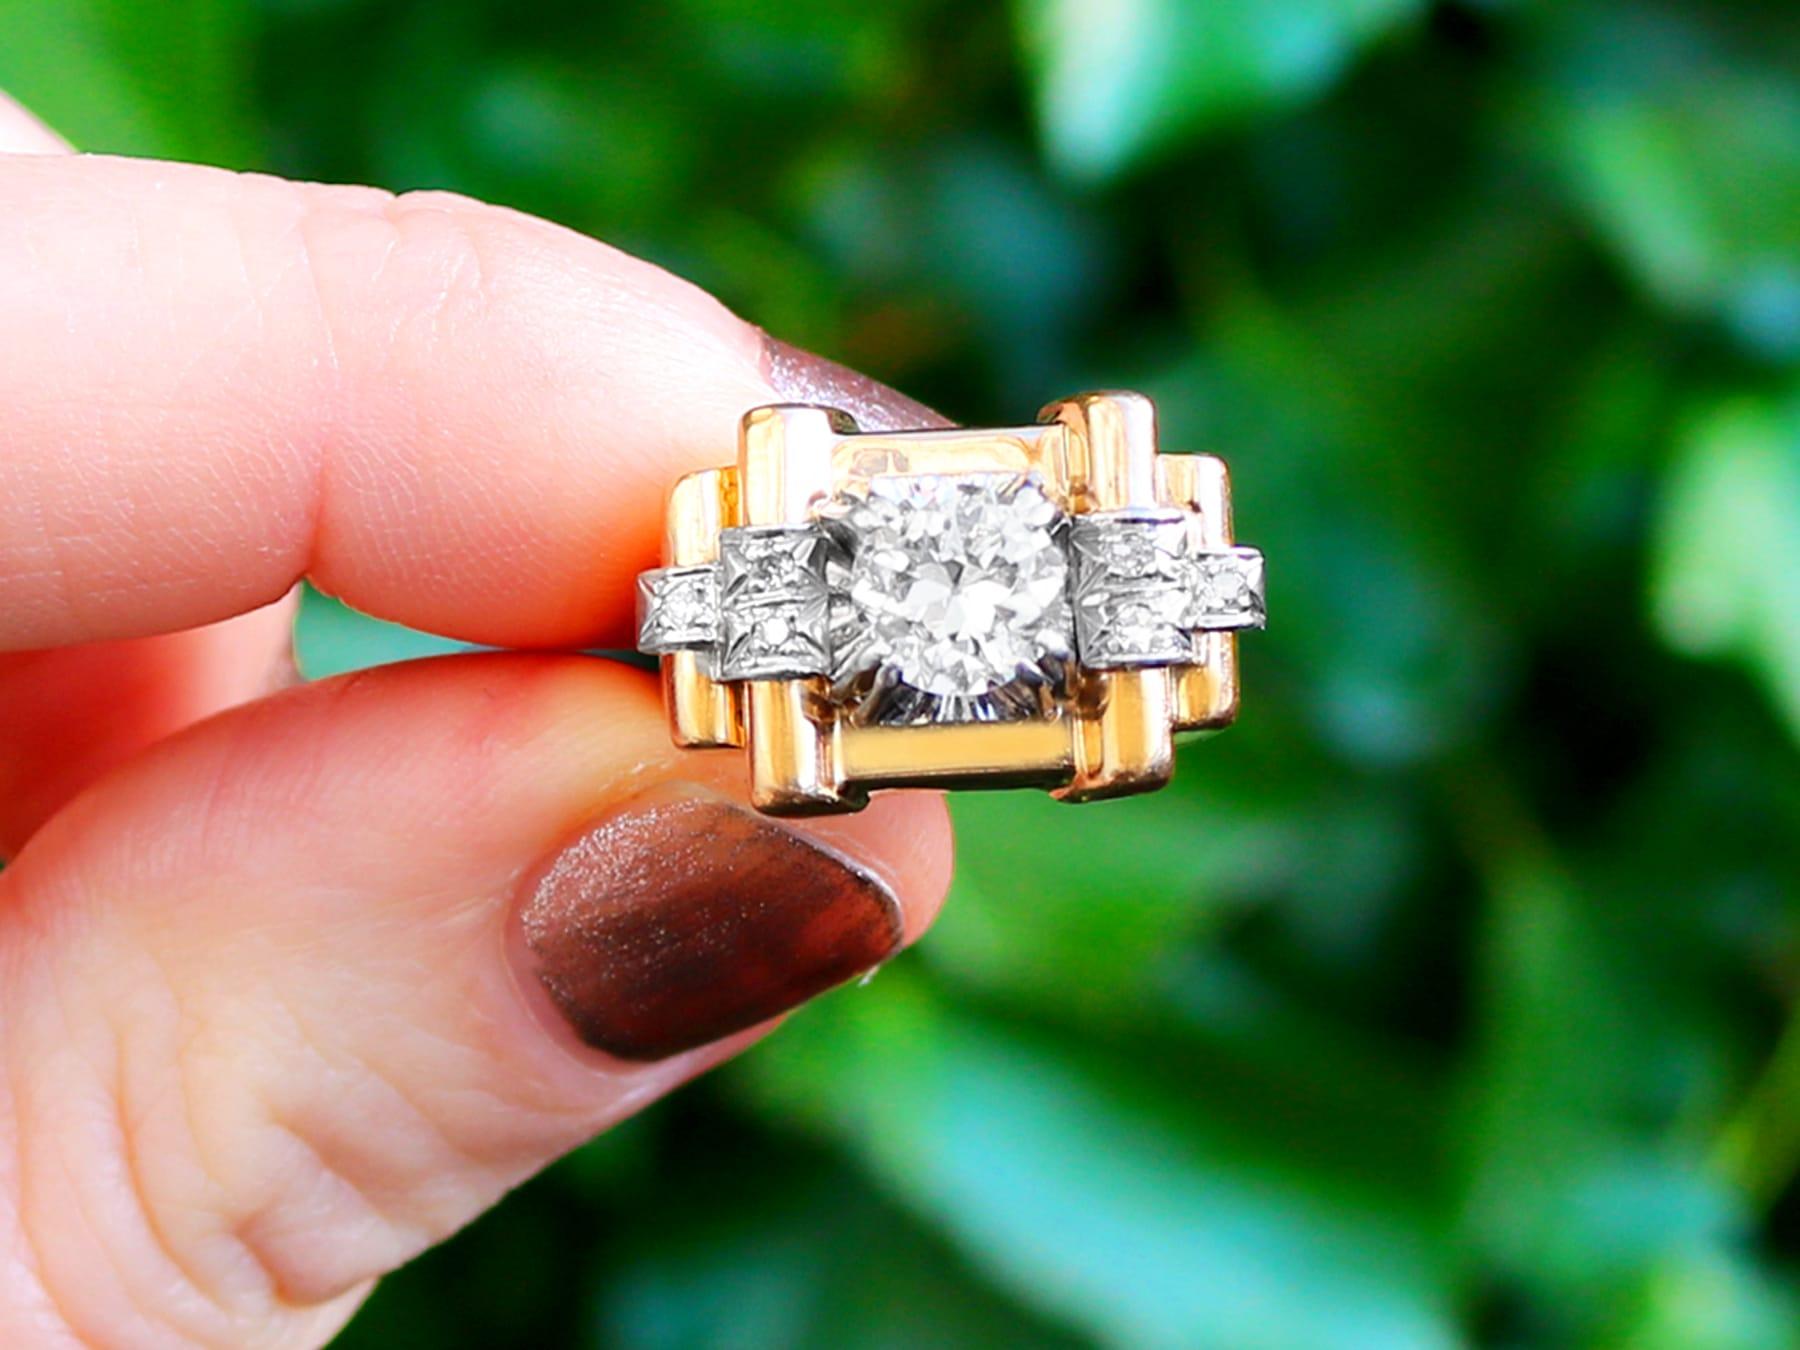 A stunning, fine and impressive vintage French 1.18 carat diamond (total) and 18 karat yellow gold, platinum set cocktail ring; part of our diverse vintage jewelry and estate jewelry collections

This stunning, fine and impressive vintage French